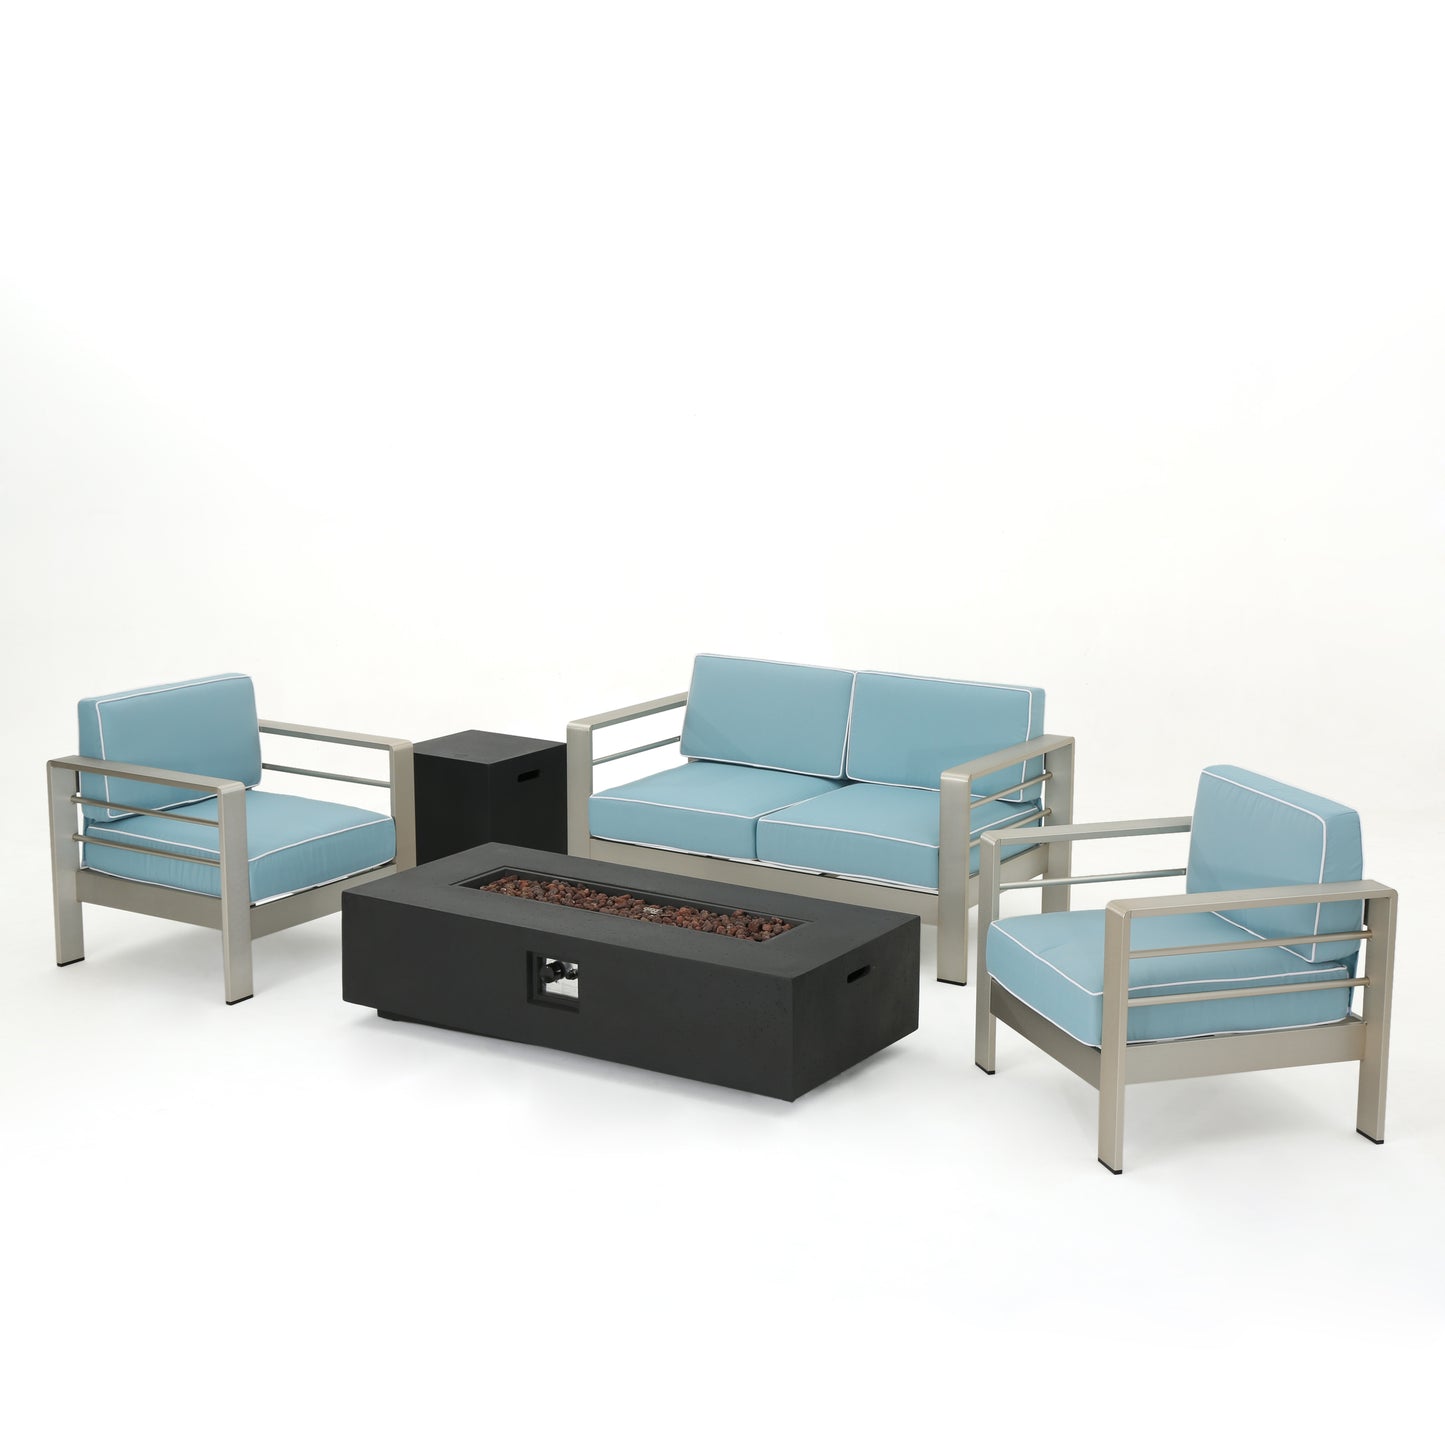 Crested Bay 5 Piece Aluminum Chat Set with Water Resistant Cushions and Fire Pit